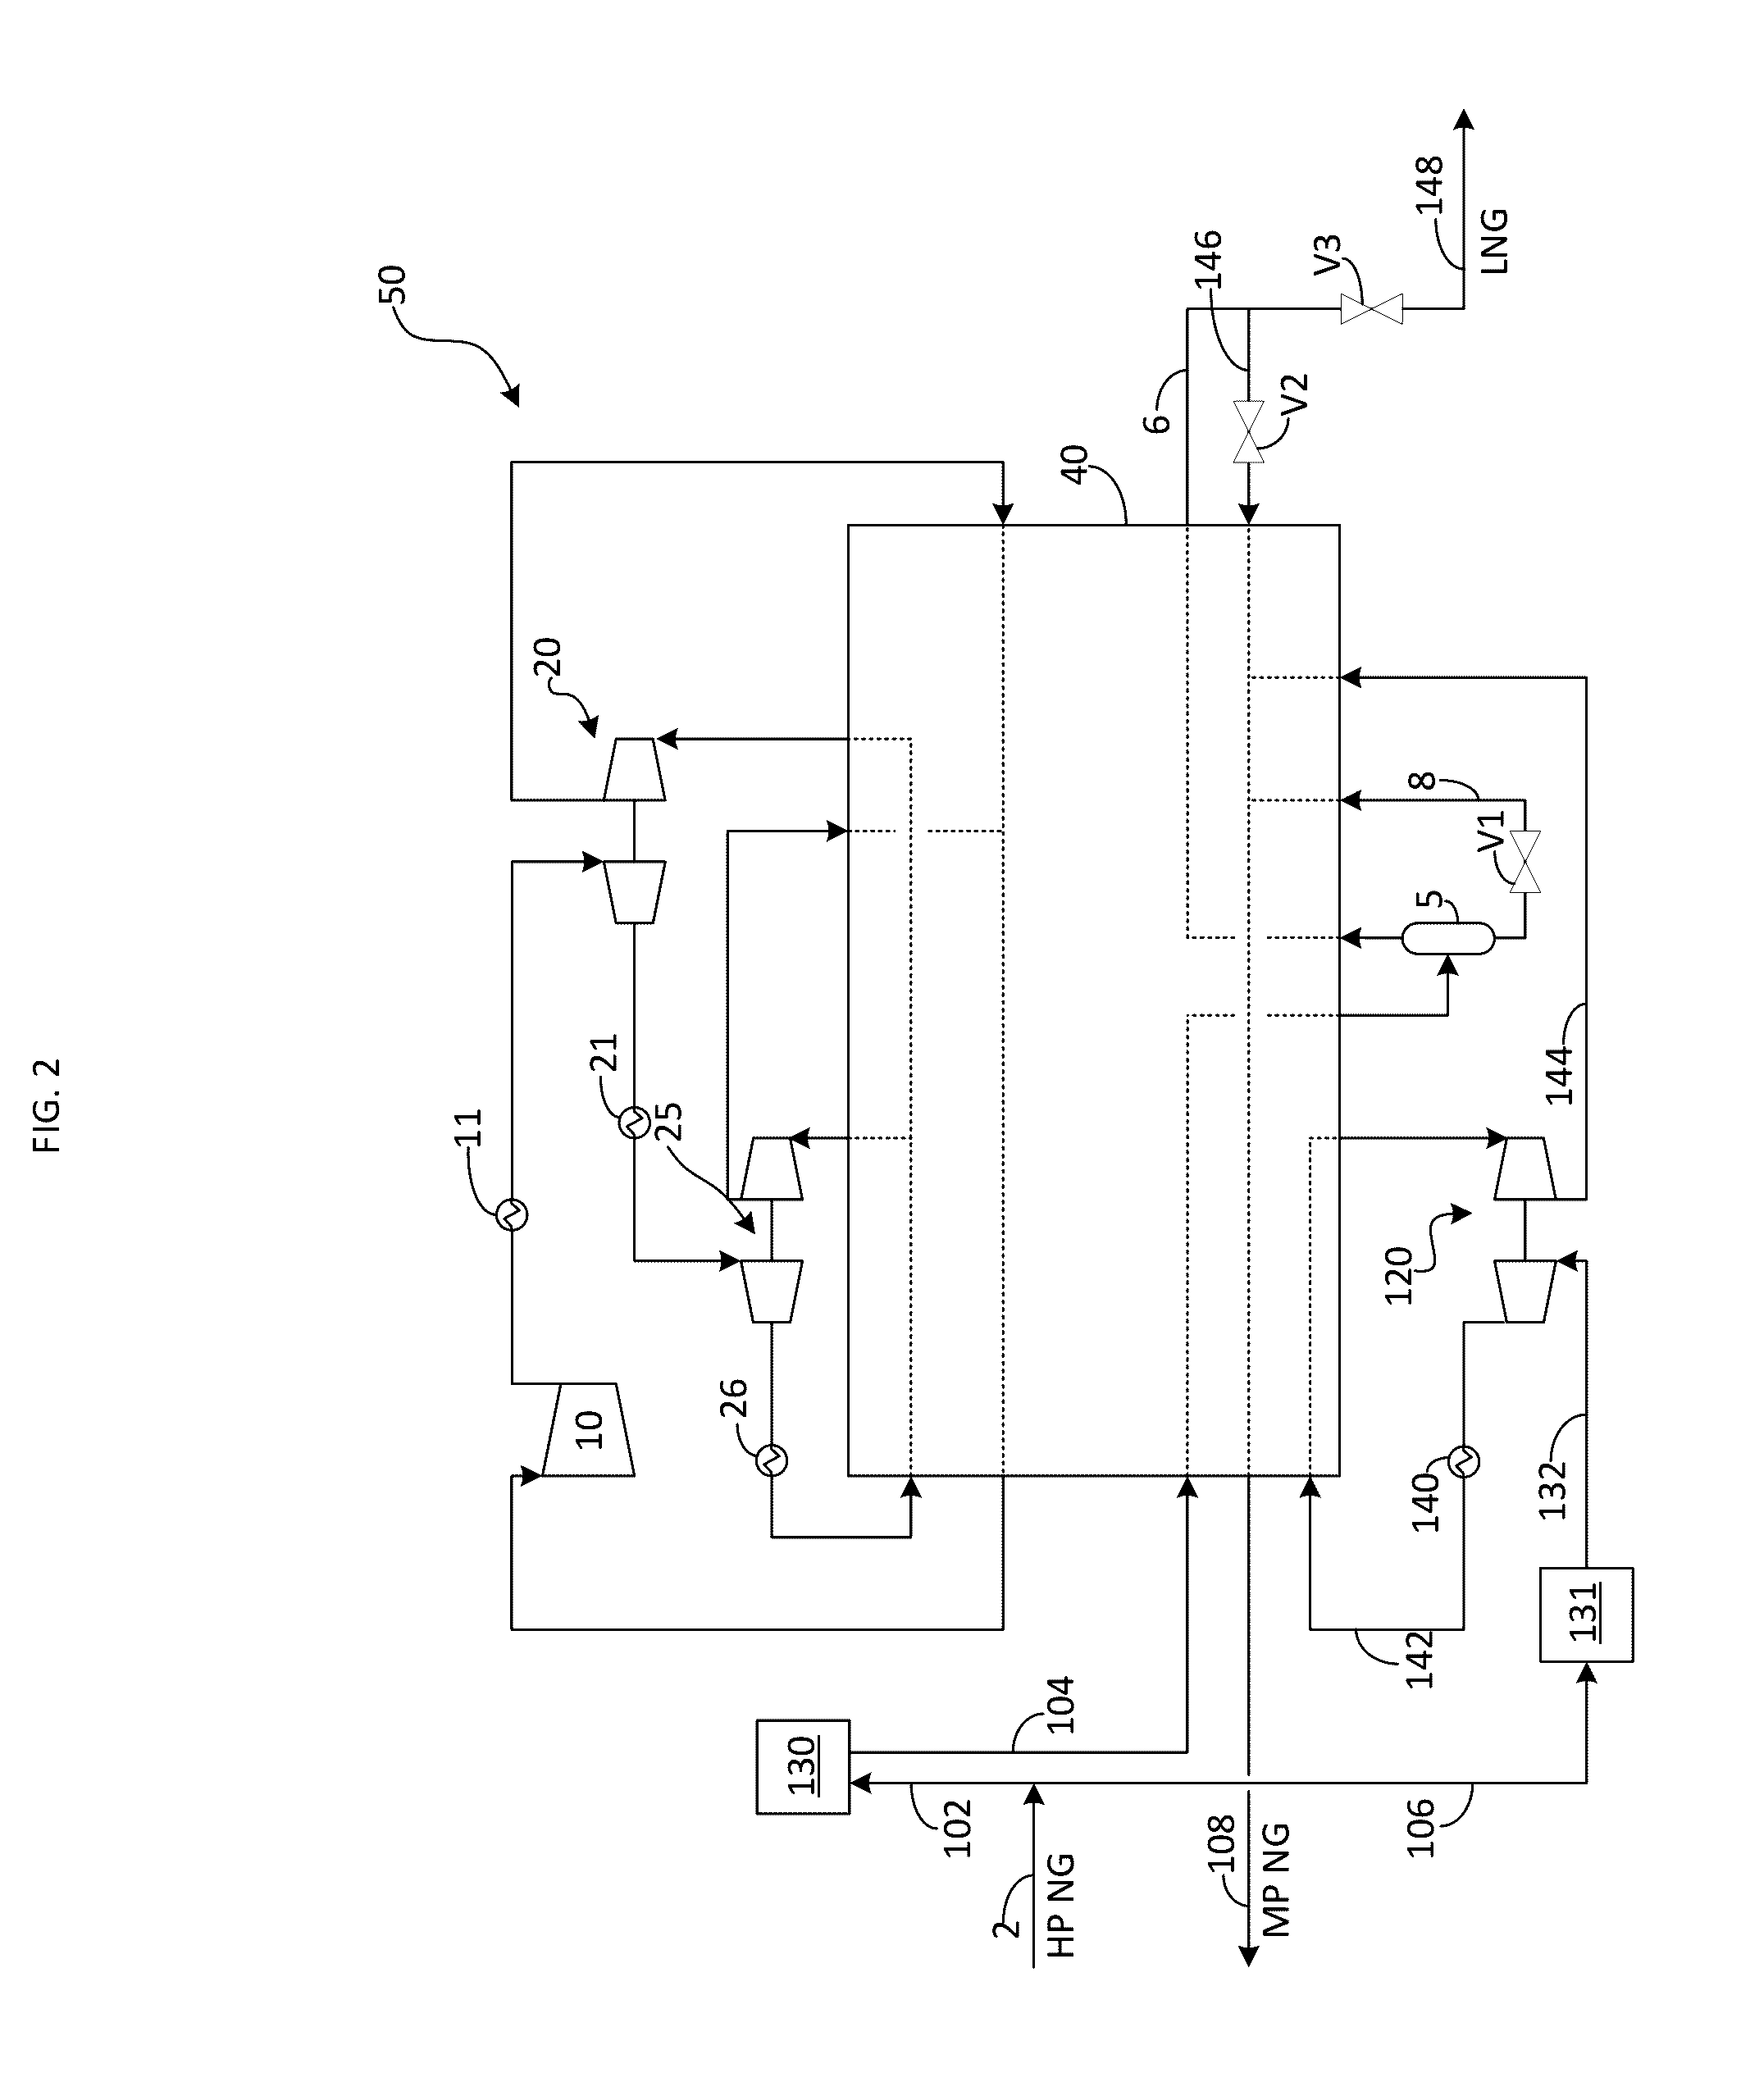 Method for the integration of a nitrogen liquefier and liquefaction of natural gas for the production of liquefied natural gas and liquid nitrogen